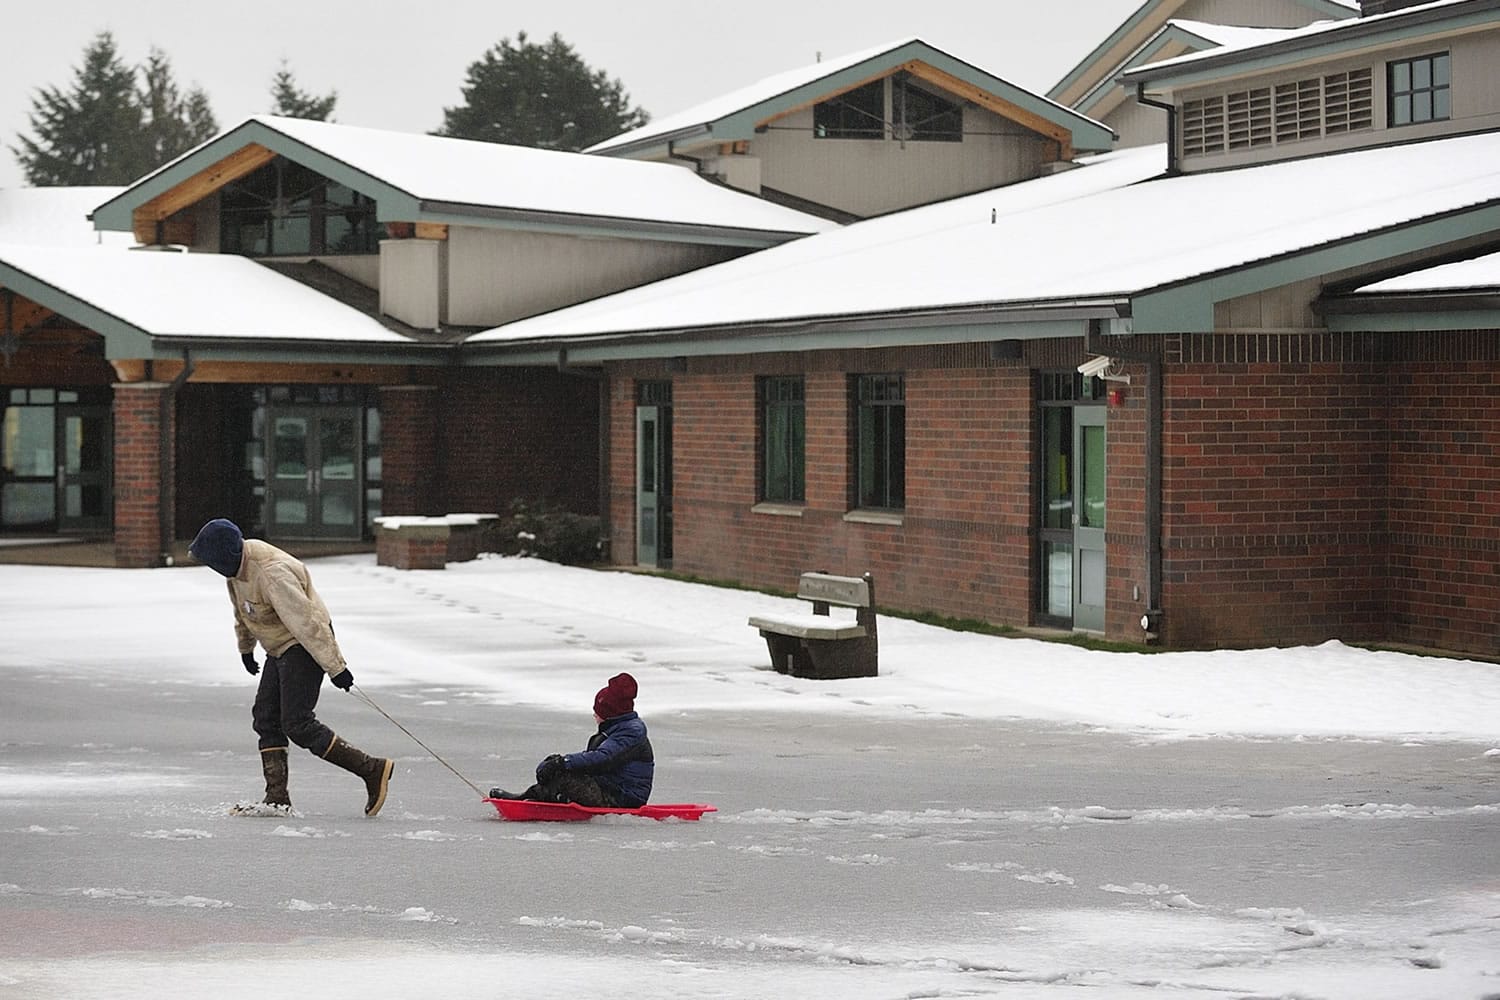 Dan Friesz, left, pulls his son, Nathan, 9, in a sled at Franklin Elementary School Wednesday.